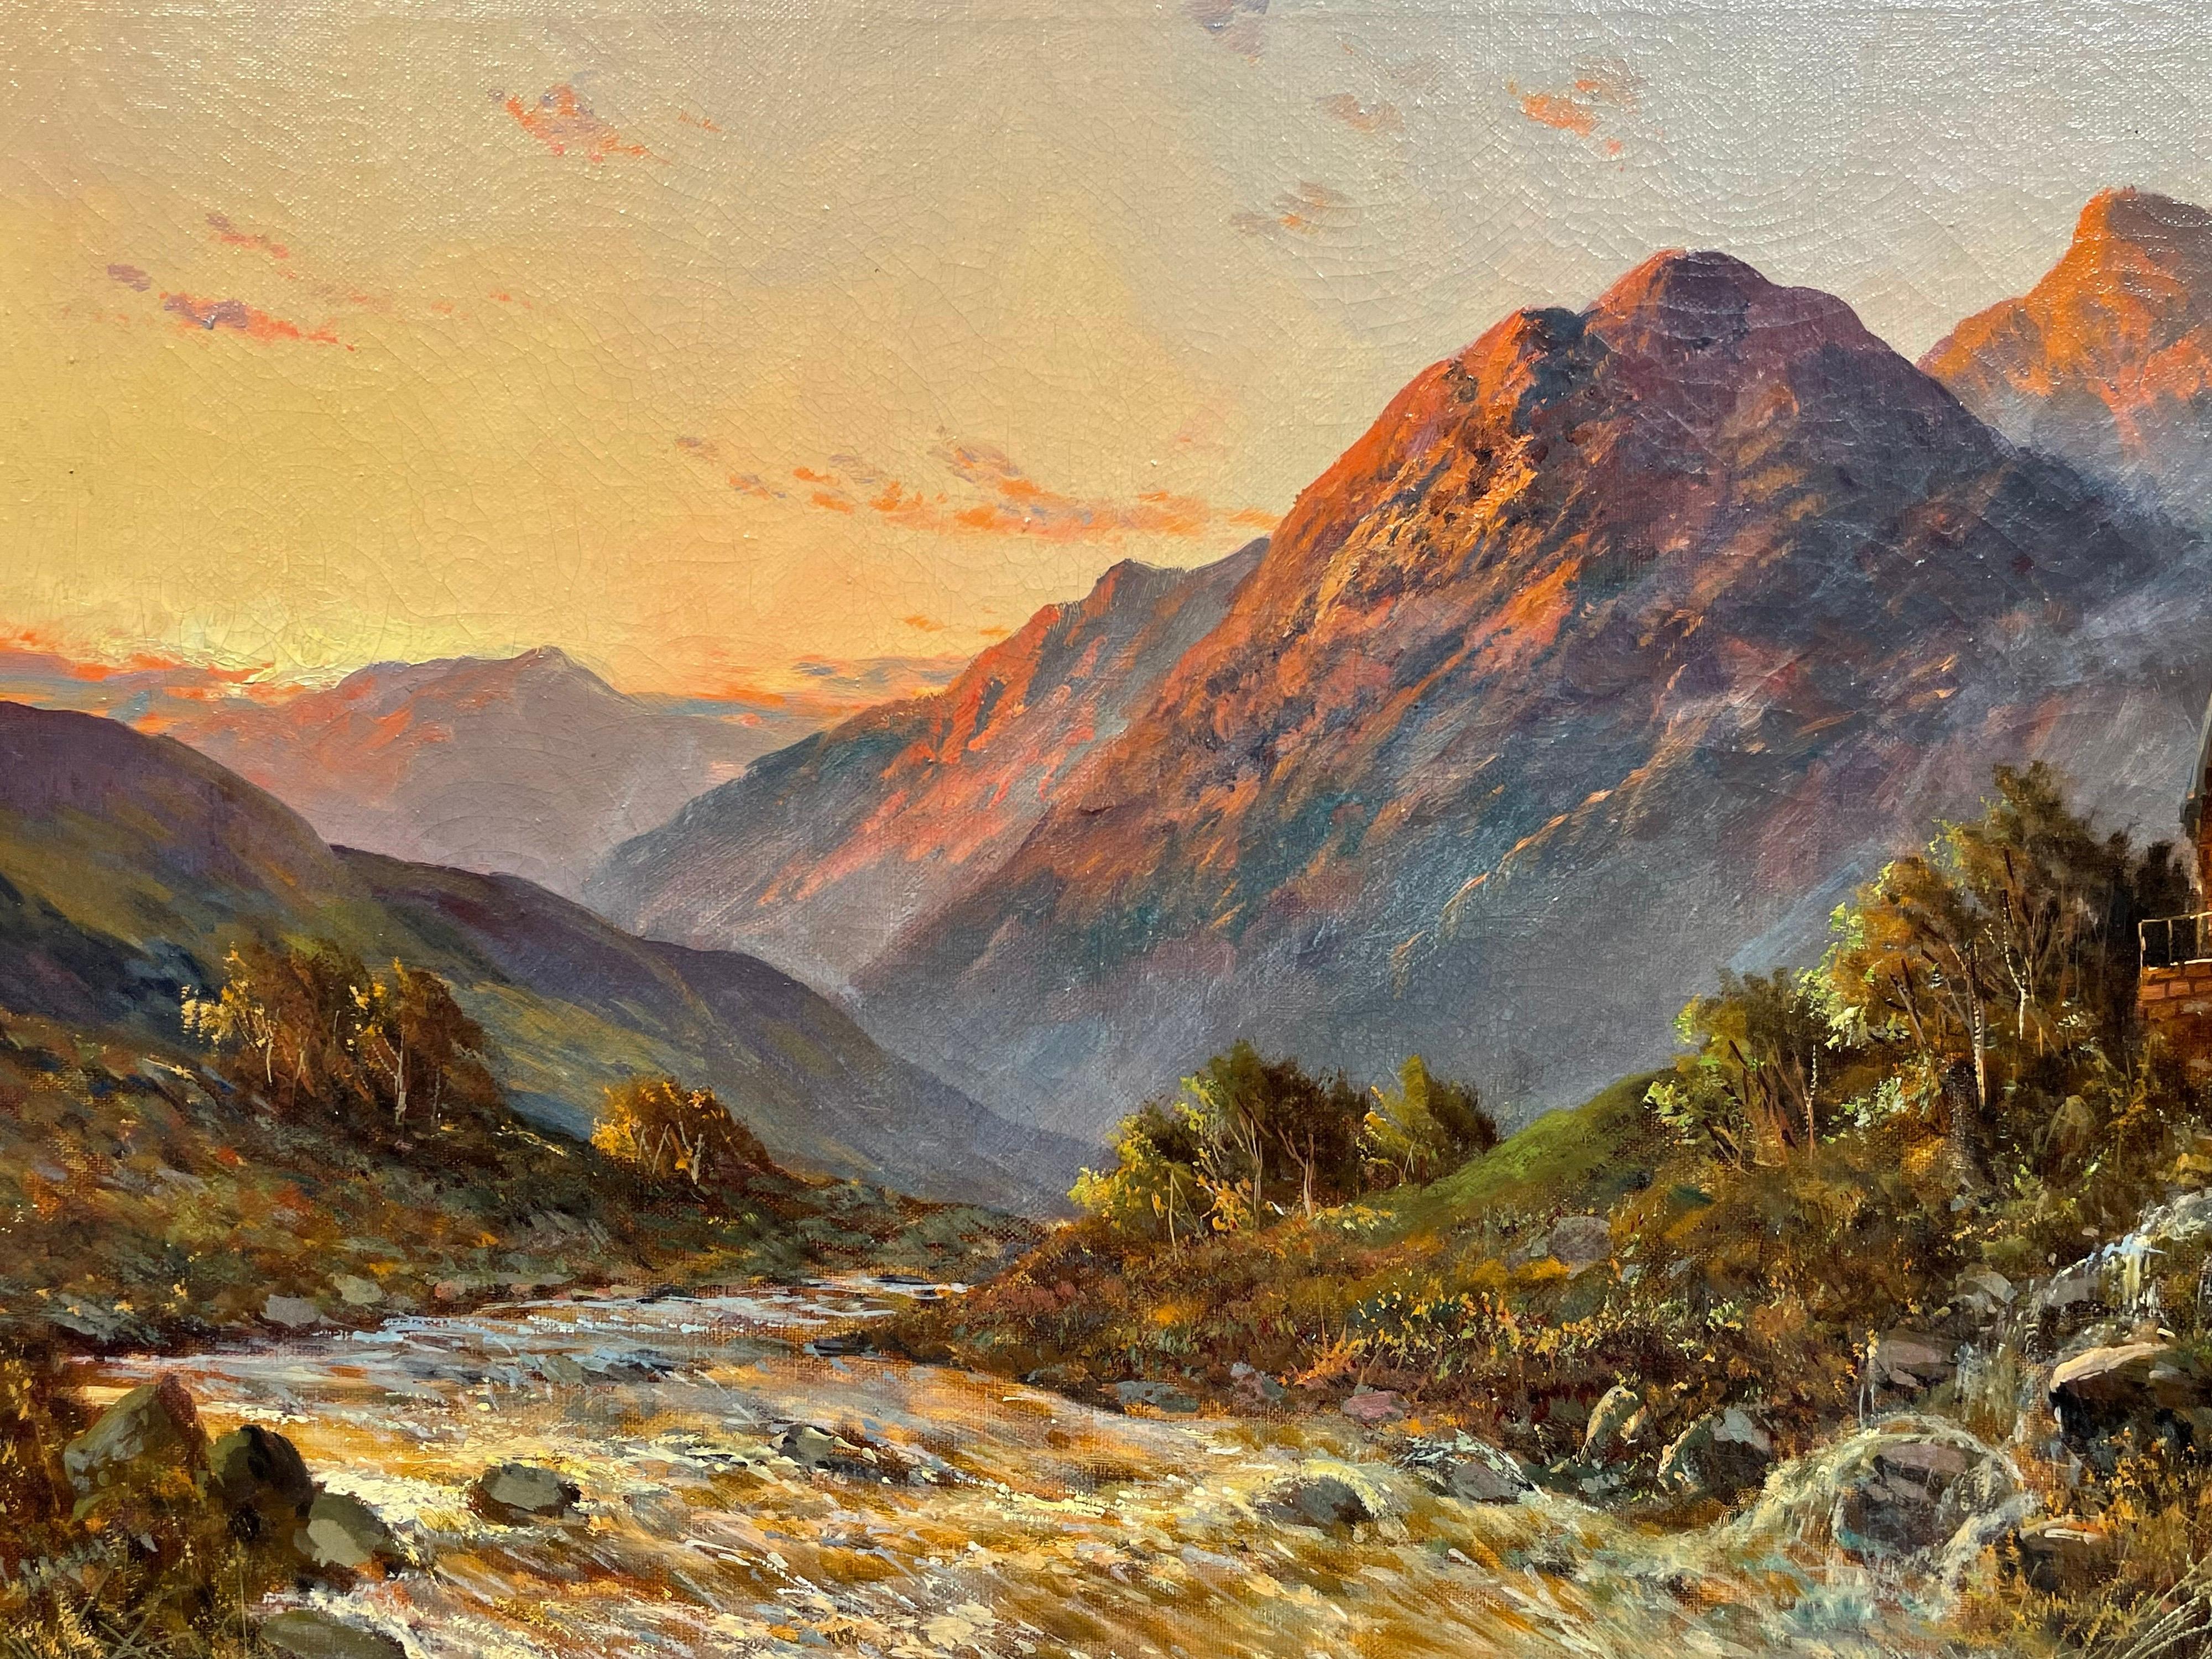 Antique Scottish Highlands Oil Painting Sunset River Landscape with Mountains - Brown Landscape Painting by Francis E. Jamieson